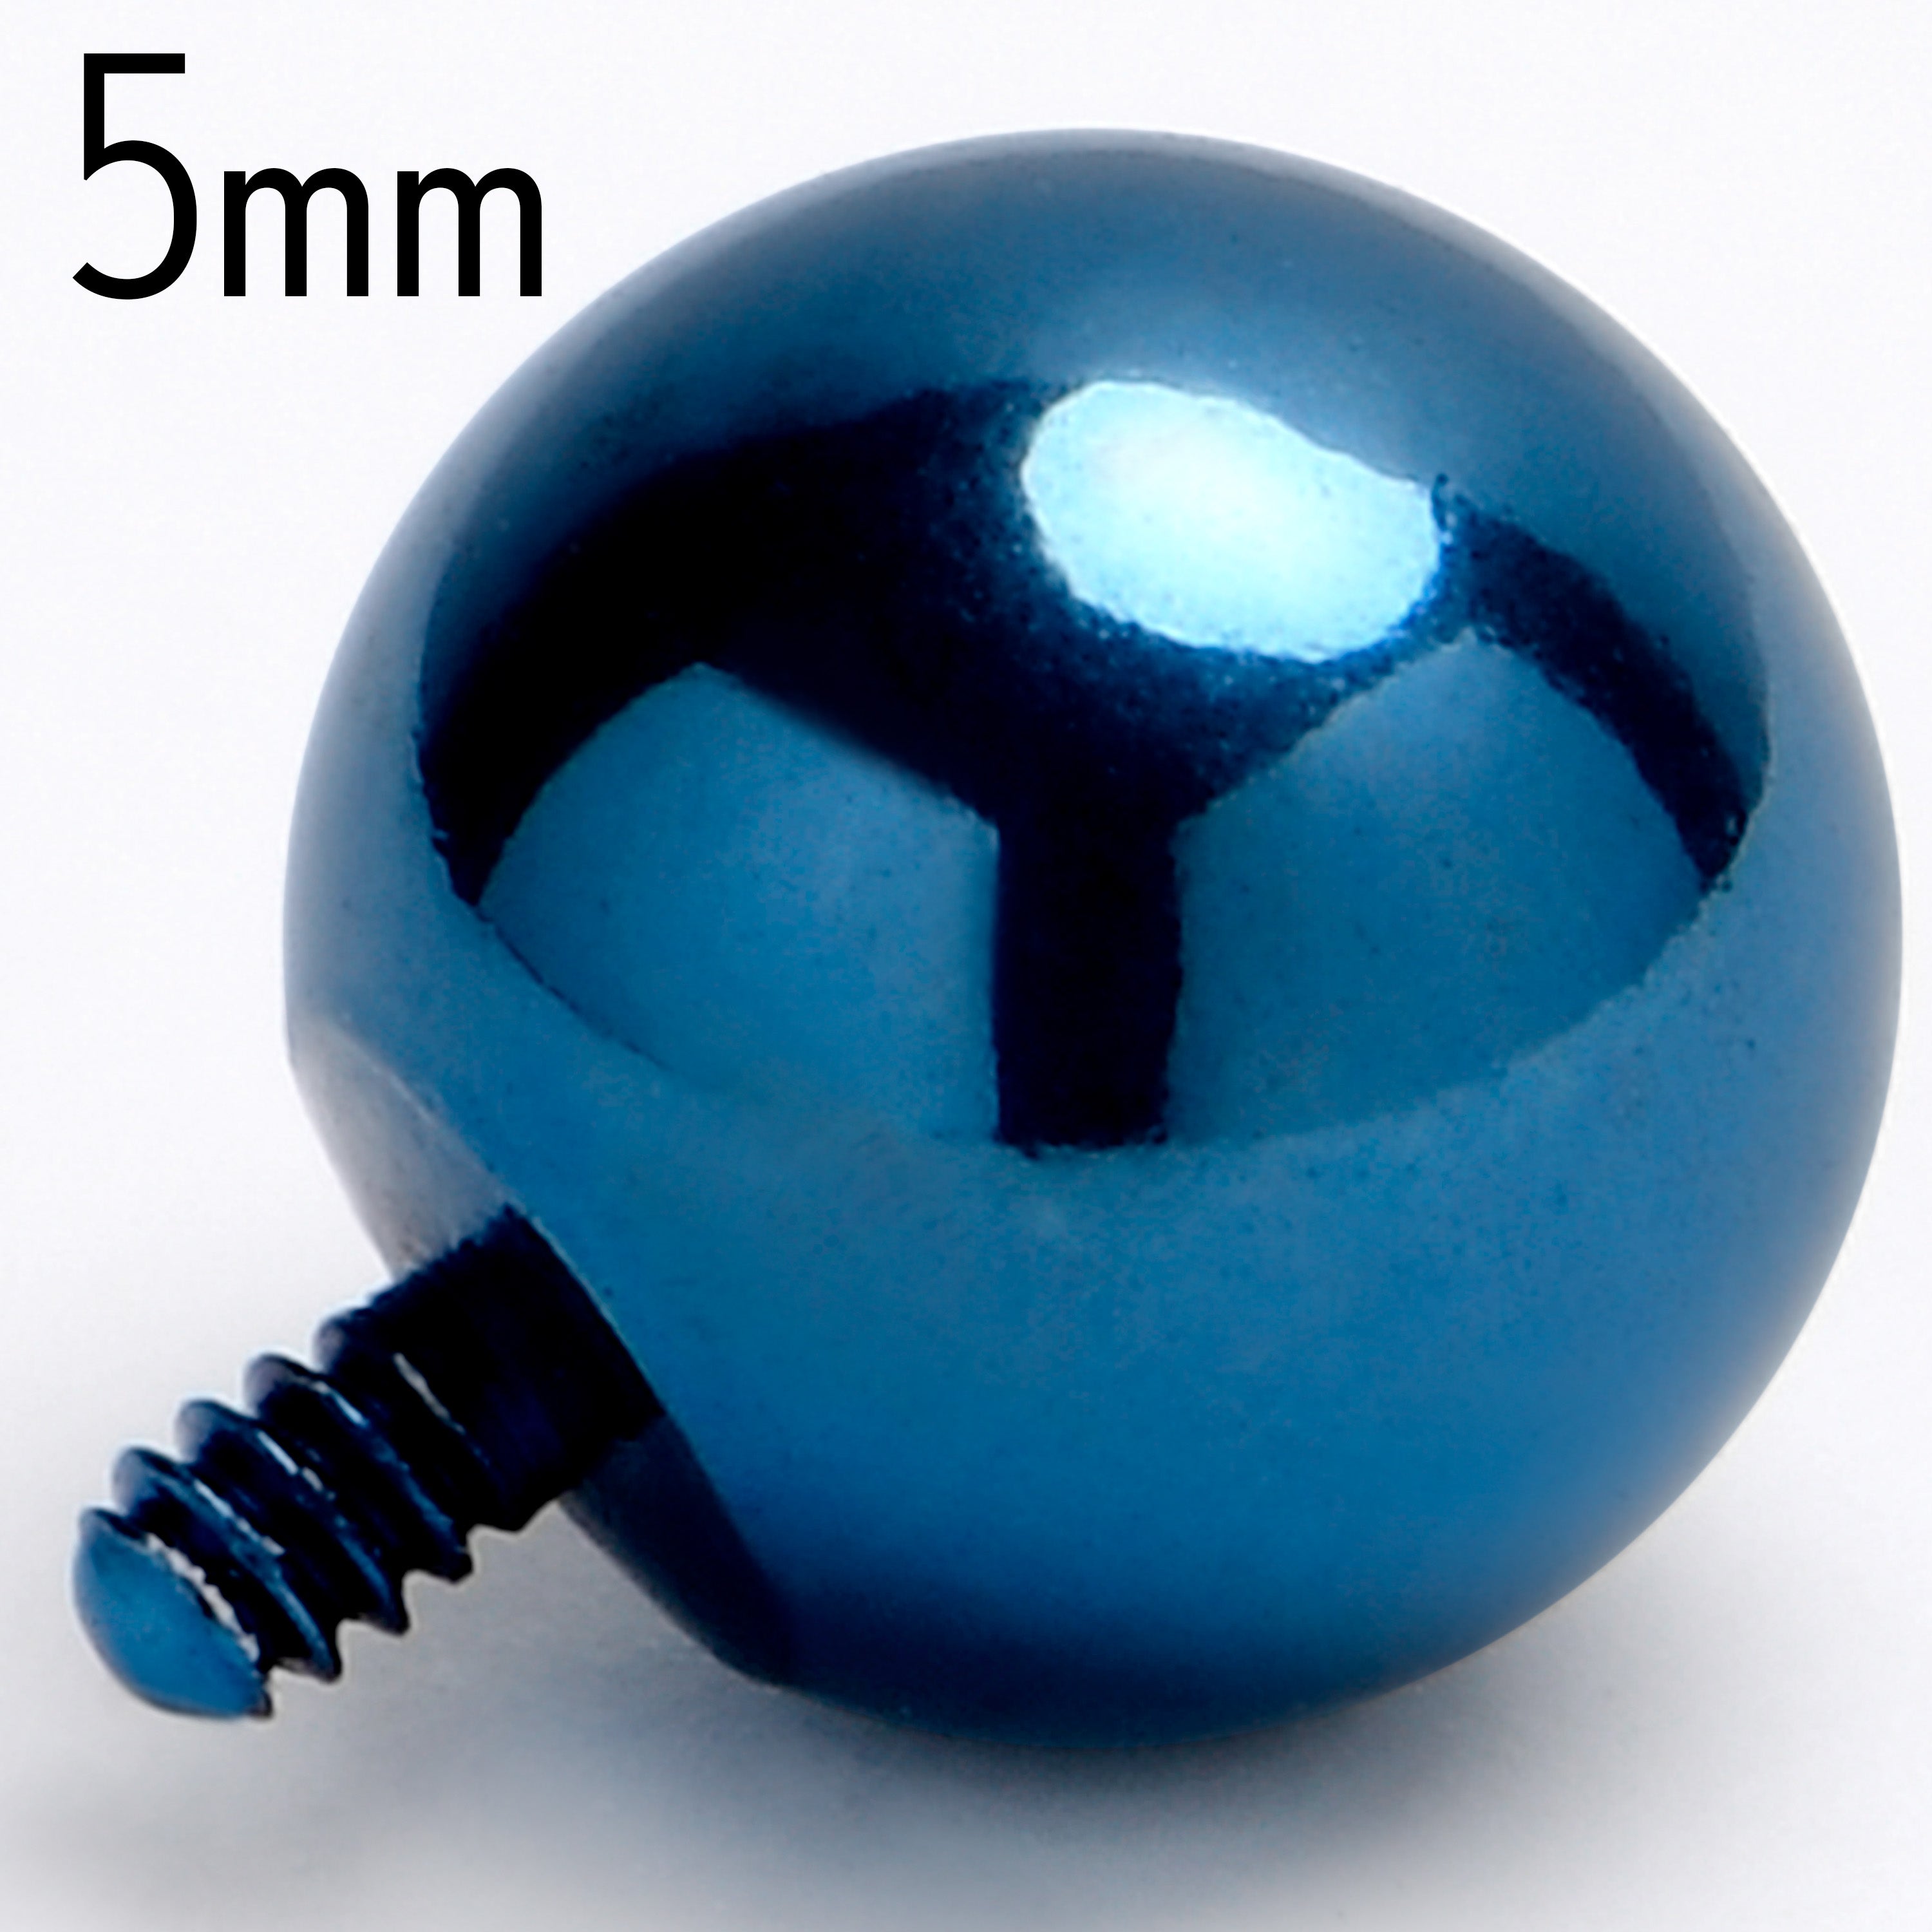 16 Gauge 5mm Blue Replacement Ball End Internally Threaded Jewelry